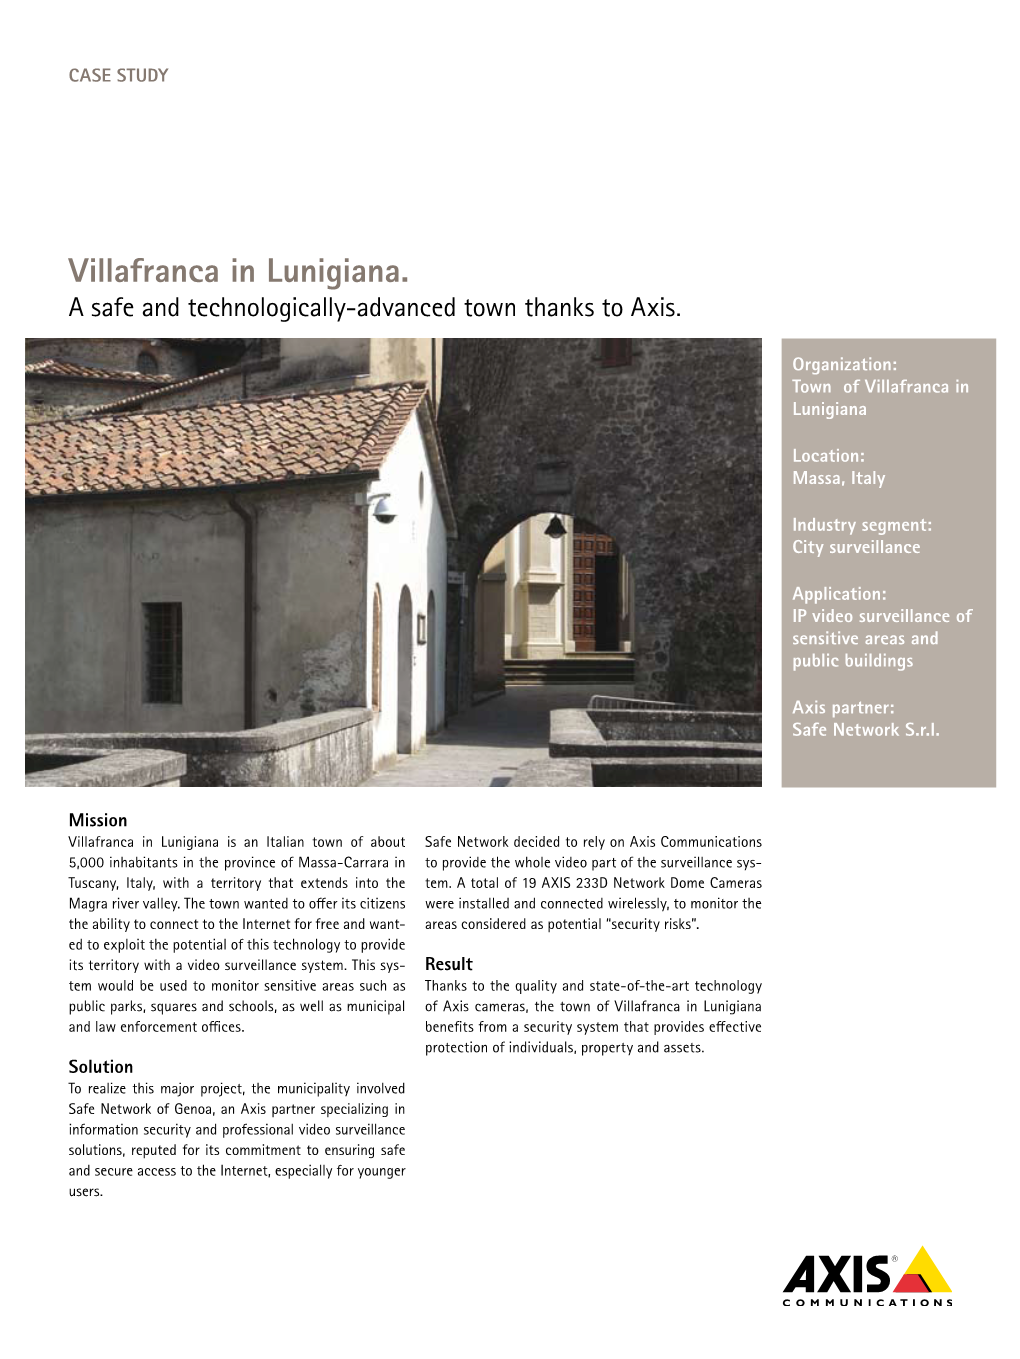 Villafranca in Lunigiana. a Safe and Technologically-Advanced Town Thanks to Axis